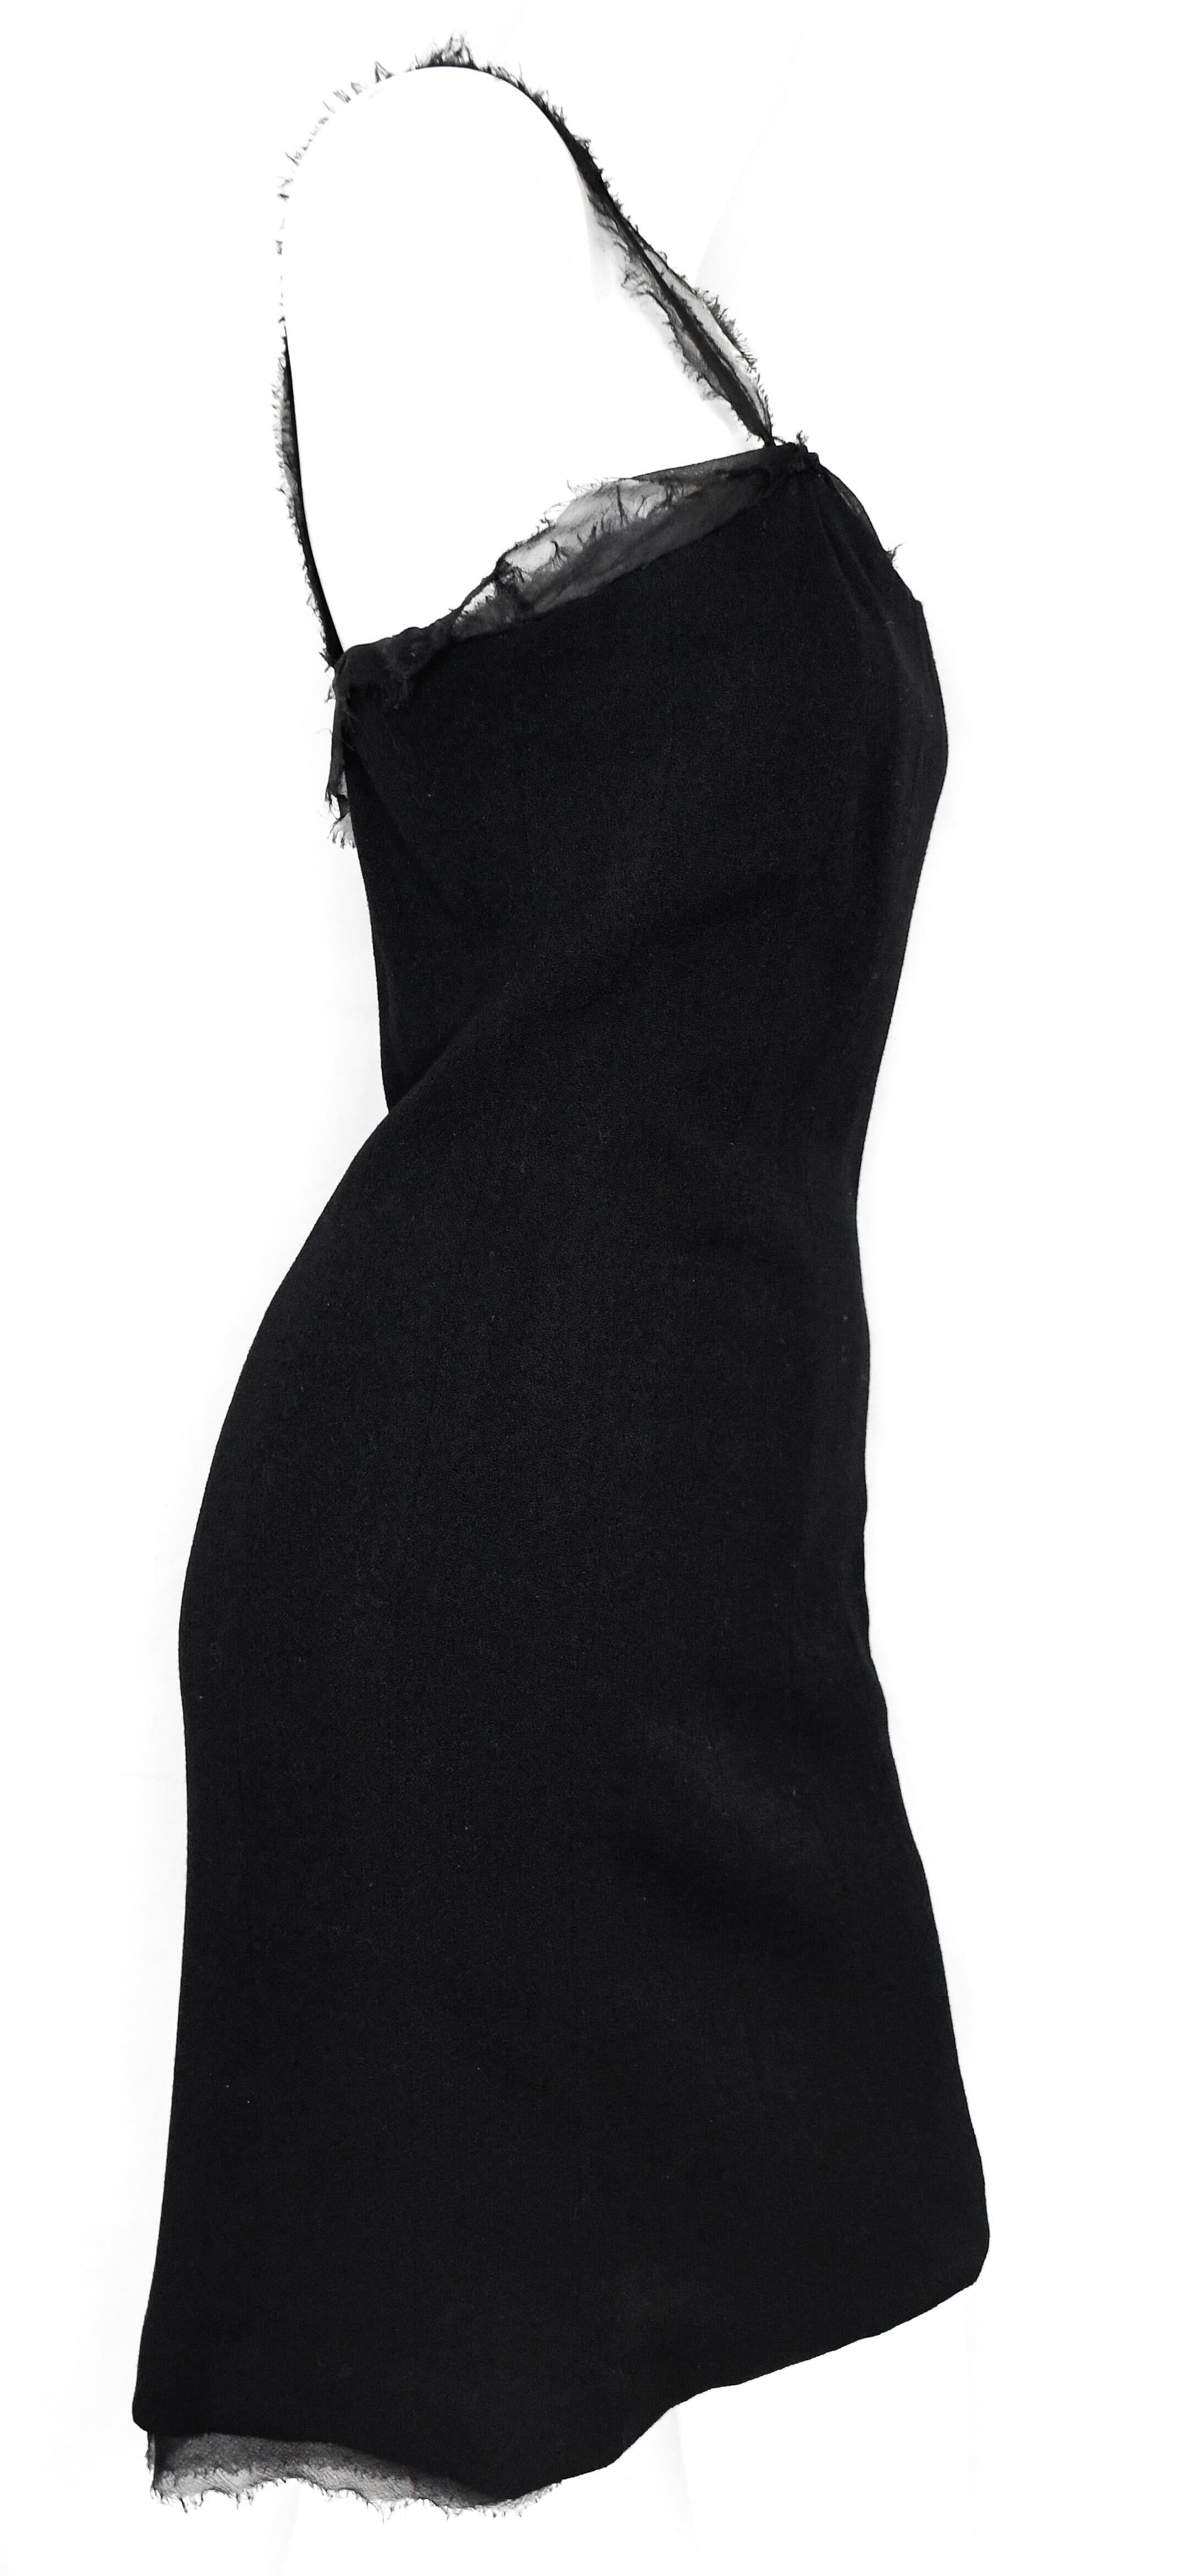 A Chanel Black Sheath is a must for any woman's wardrobe.  Features include sophisticated sheath silhouette, sleeveless design, luxurious black wool crepe fabric and frayed sheer trim on straps and at hem.  Finished with rear hidden zipper with hook